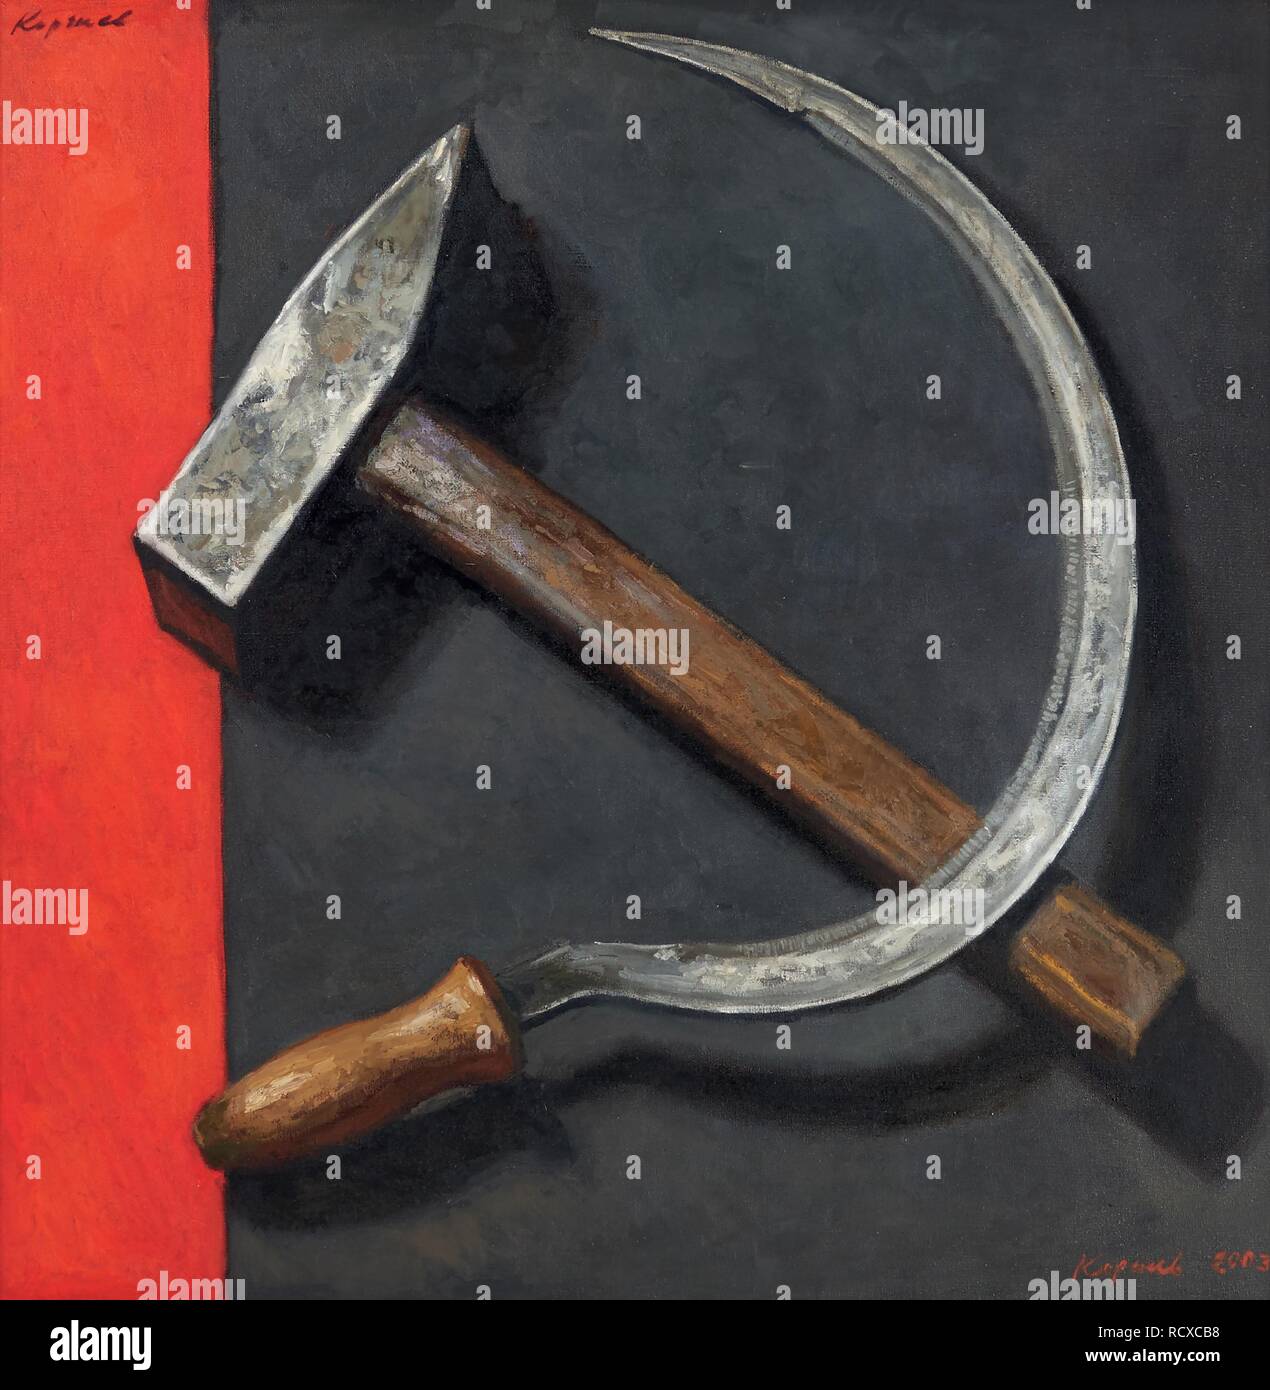 Hammer and sickle. Museum: PRIVATE COLLECTION. Author: Korzhev, Geli  Mikhaylovich. Copyright: This artwork is not in public domain. It is your  responsibility to obtain all necessary third party permissions from the  copyright